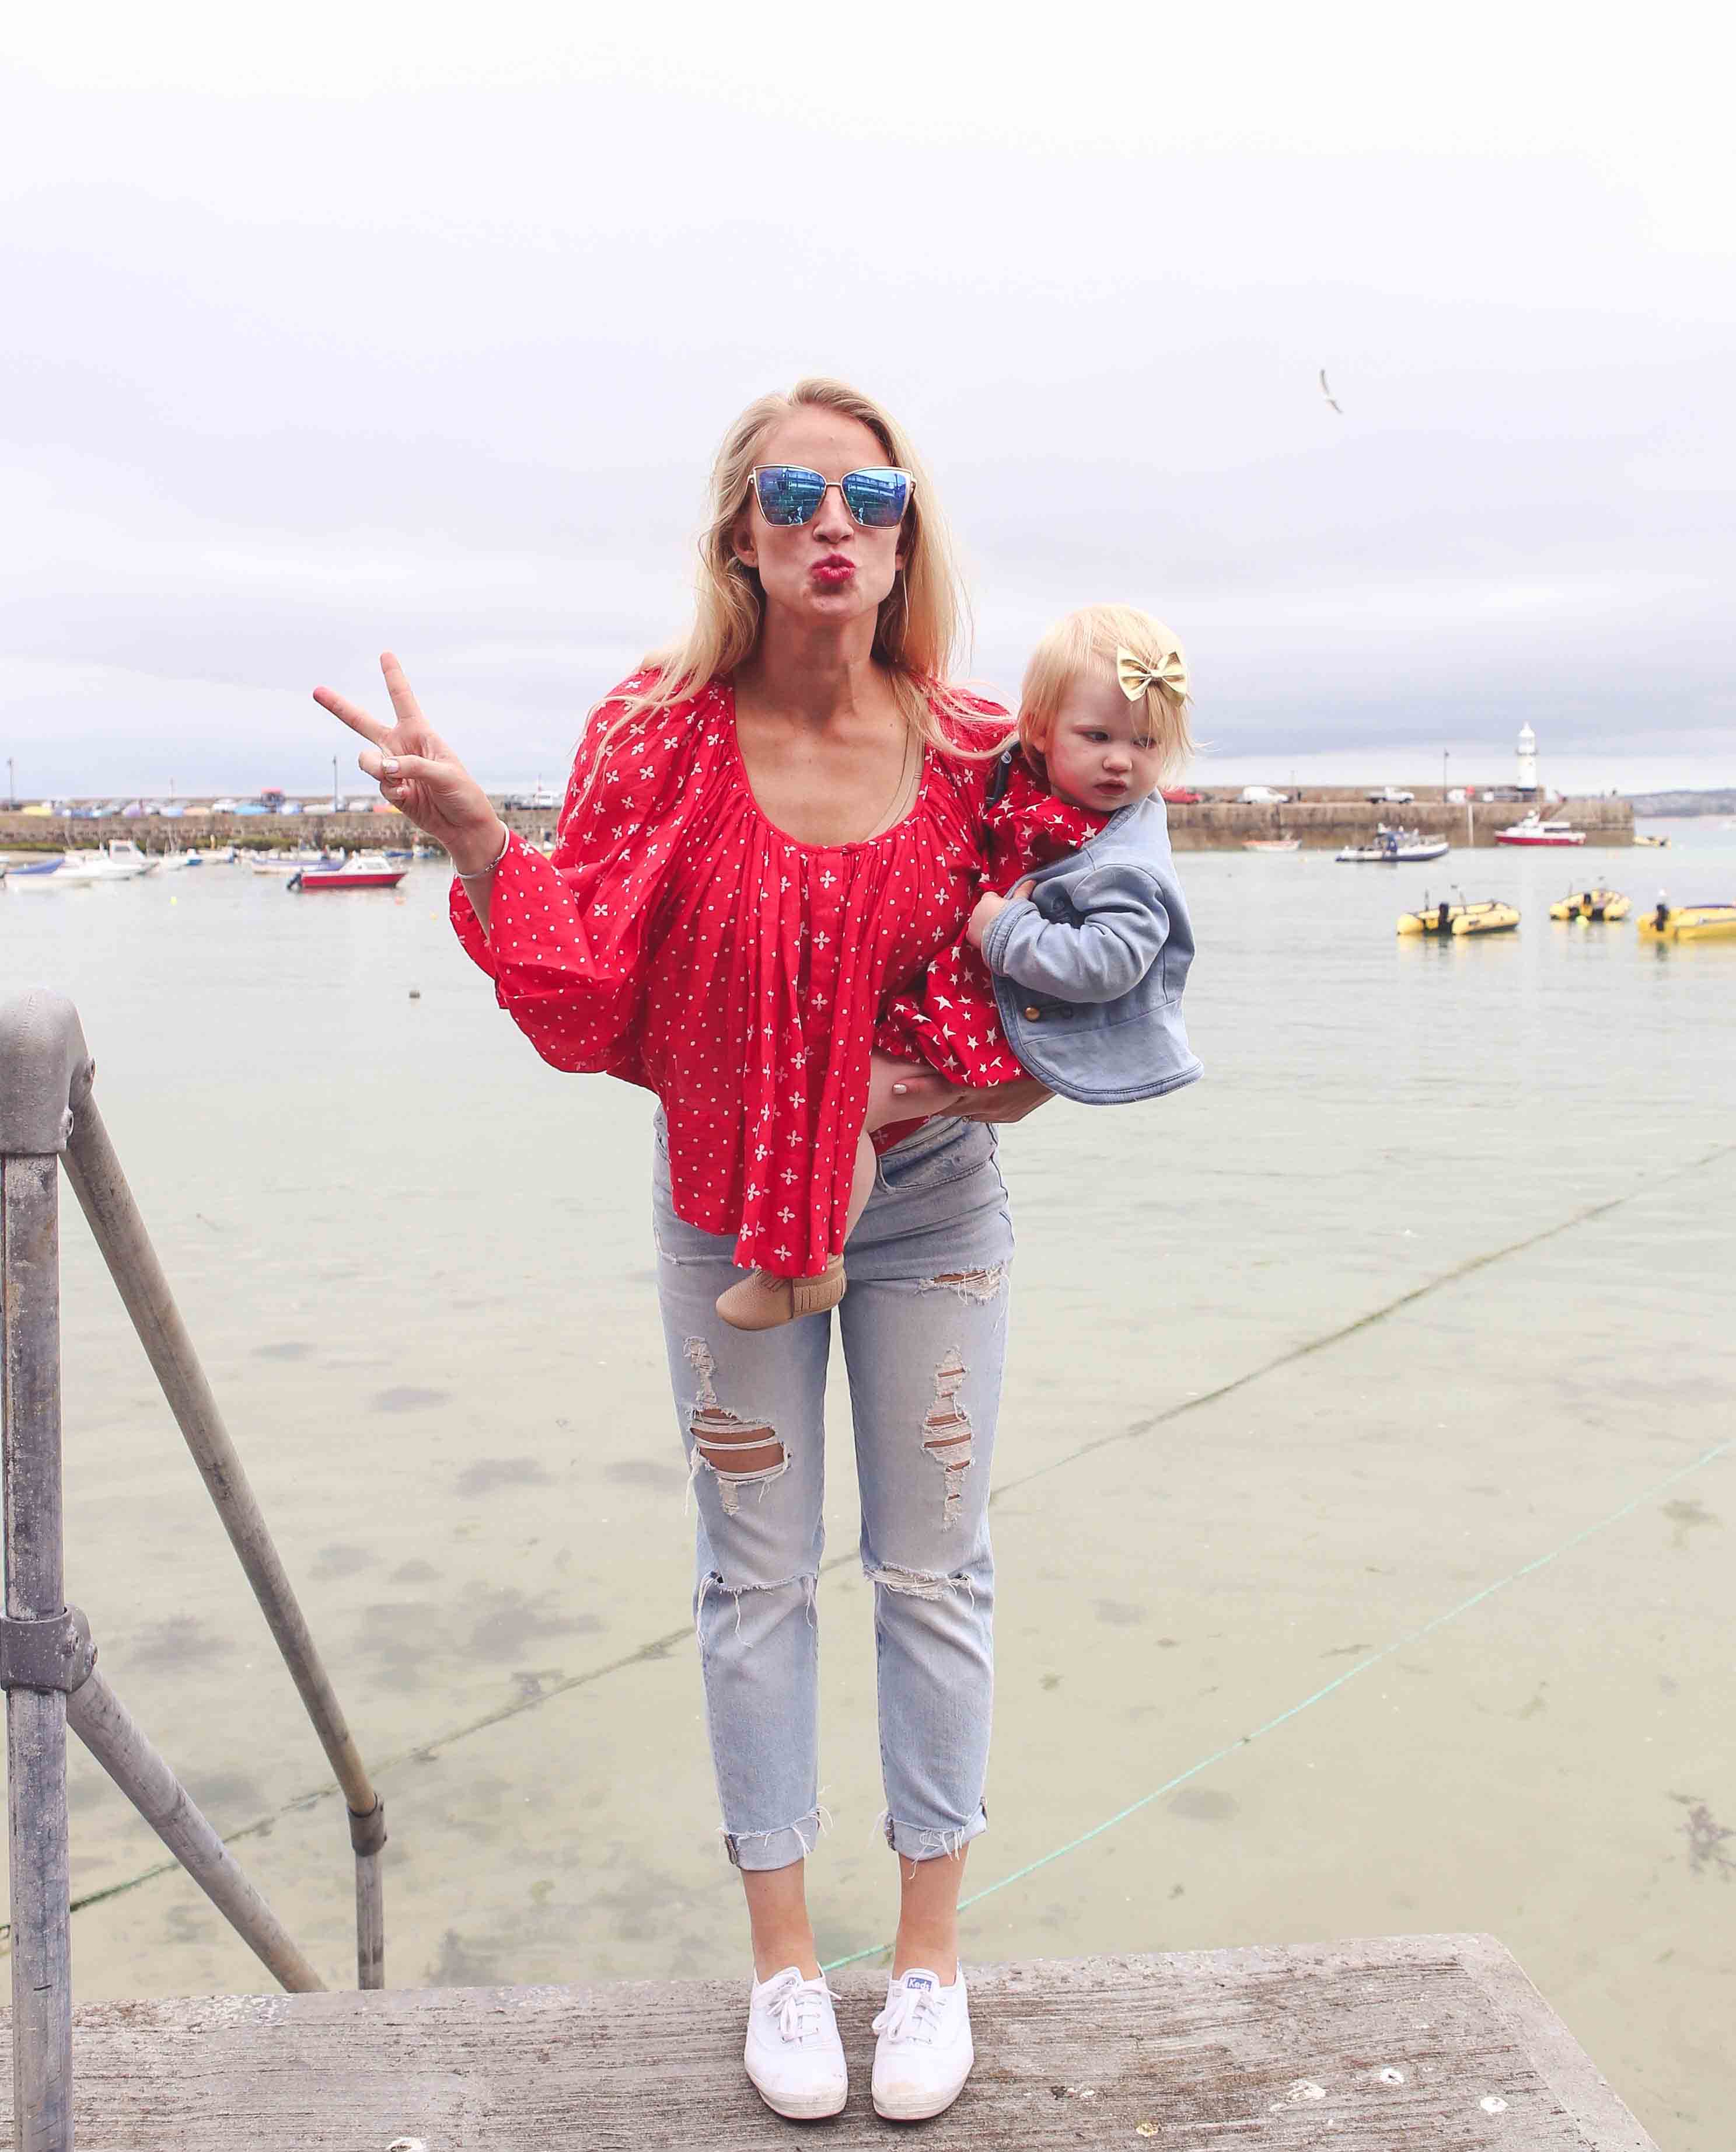 Cornwall Travel Guide with the Polurrian Bay Hotel by Atlanta blogger Jessica of Happily Hughes